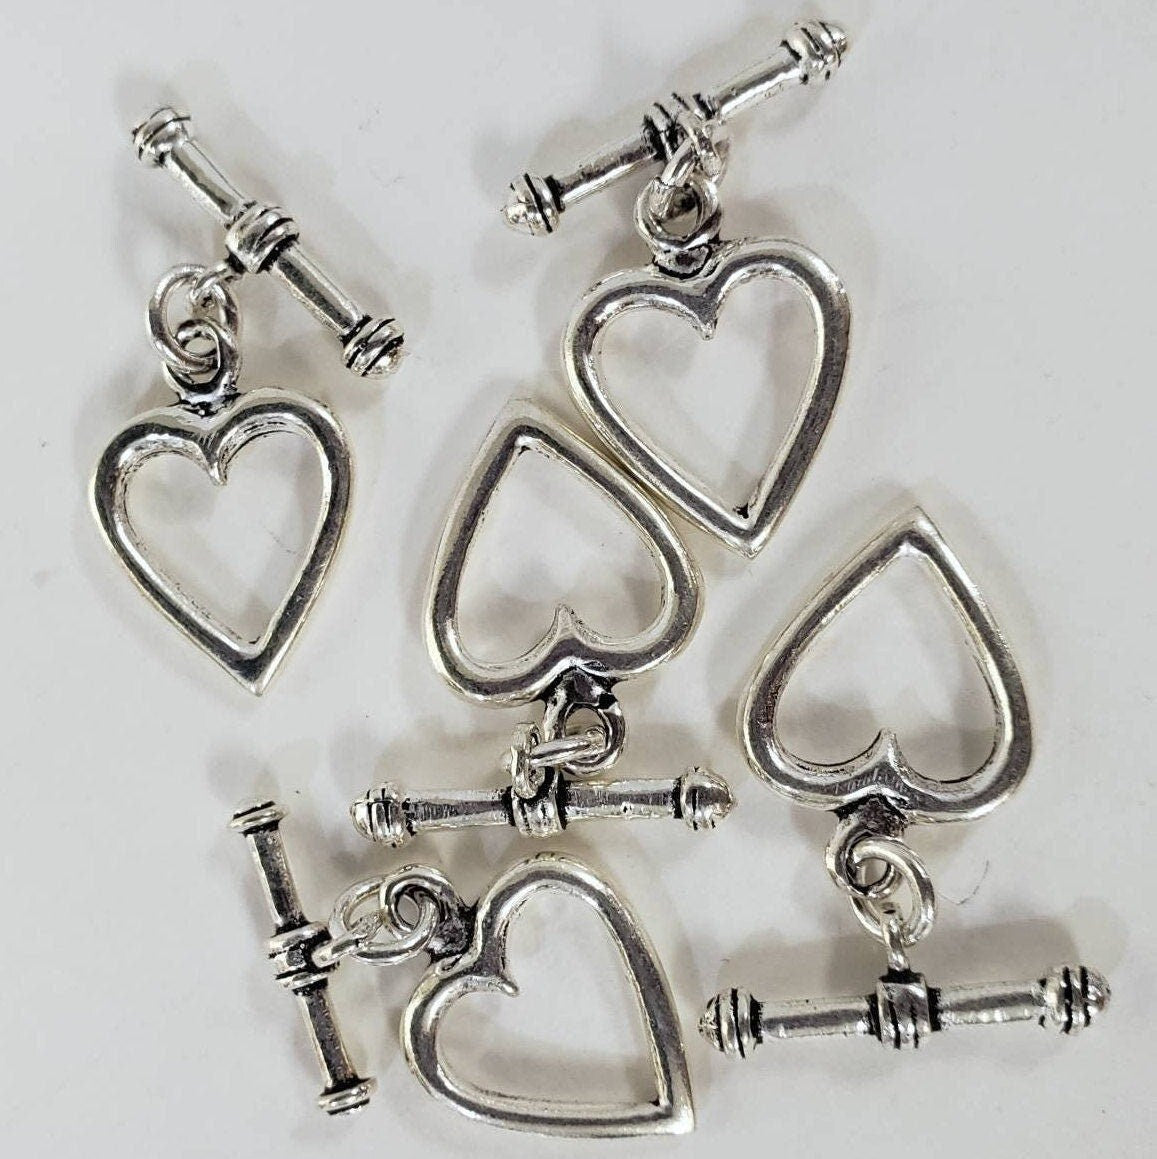 2 sets 925 sterling silver Bali Heart shape 14x15mm toggle clasp, jewelry making Bali vintage handmade antique toggle lock .